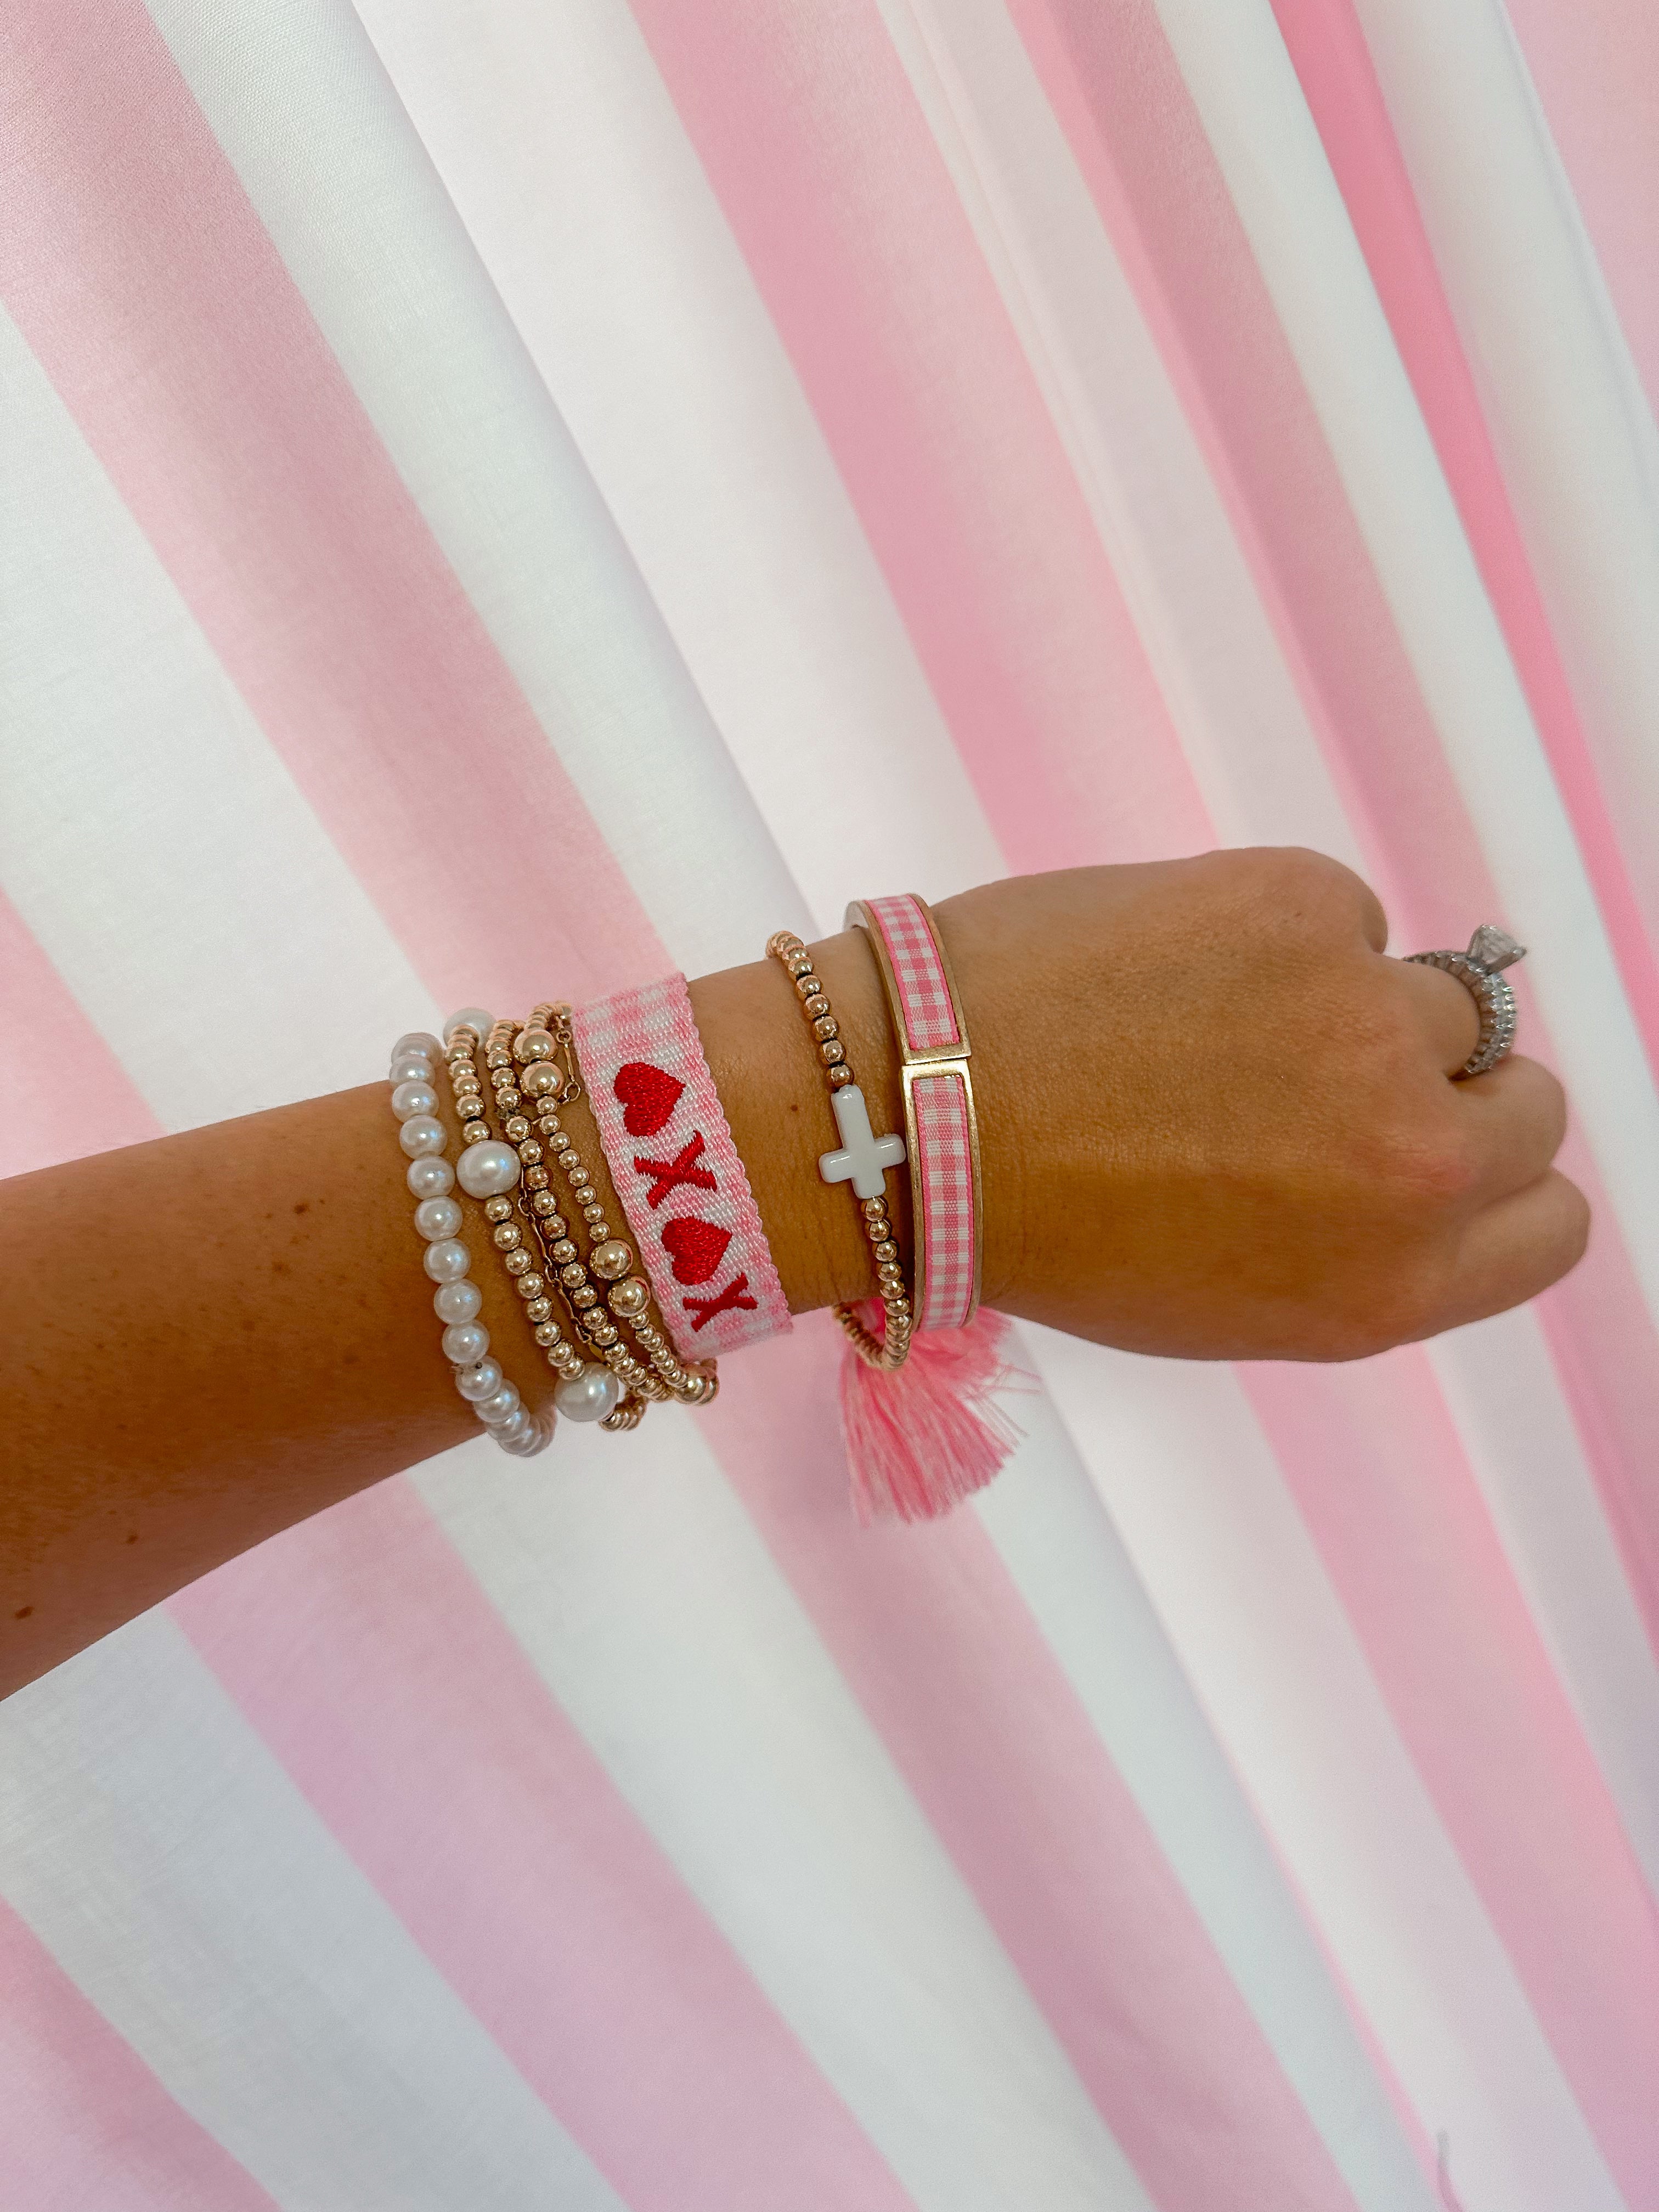 Love you to the moon bracelet